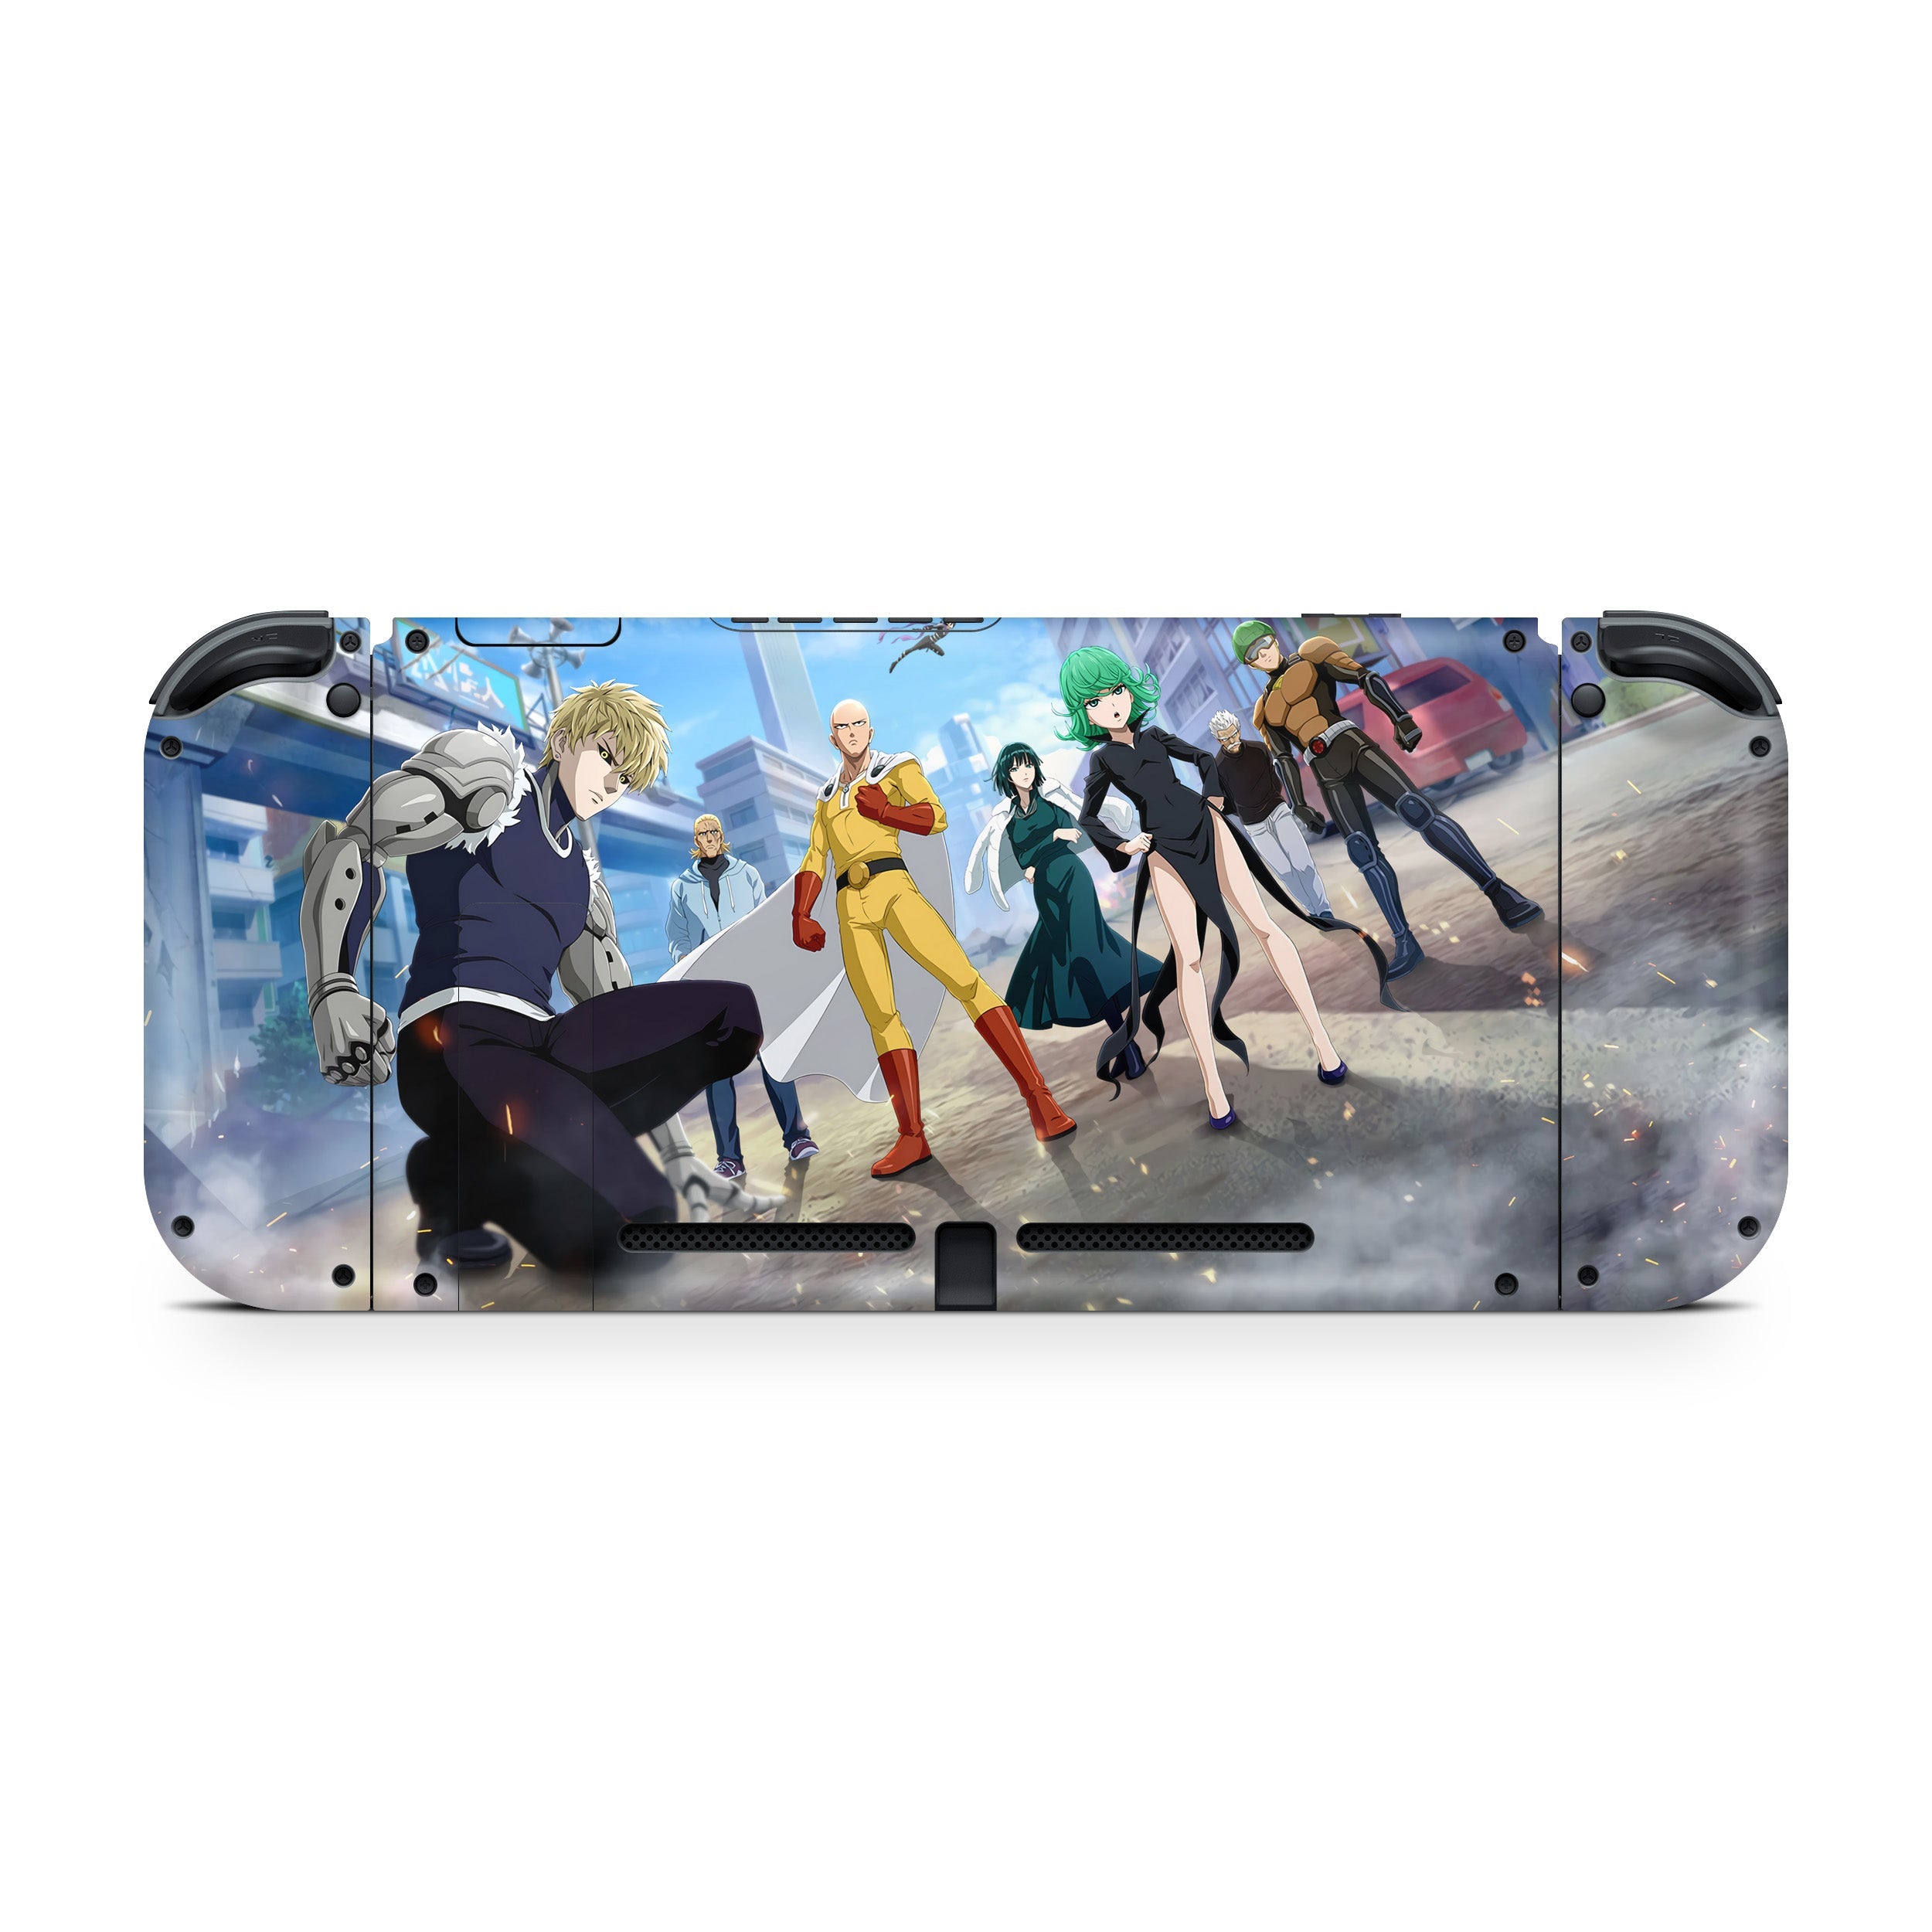 A video game skin featuring a One Punch Man design for the Nintendo Switch.